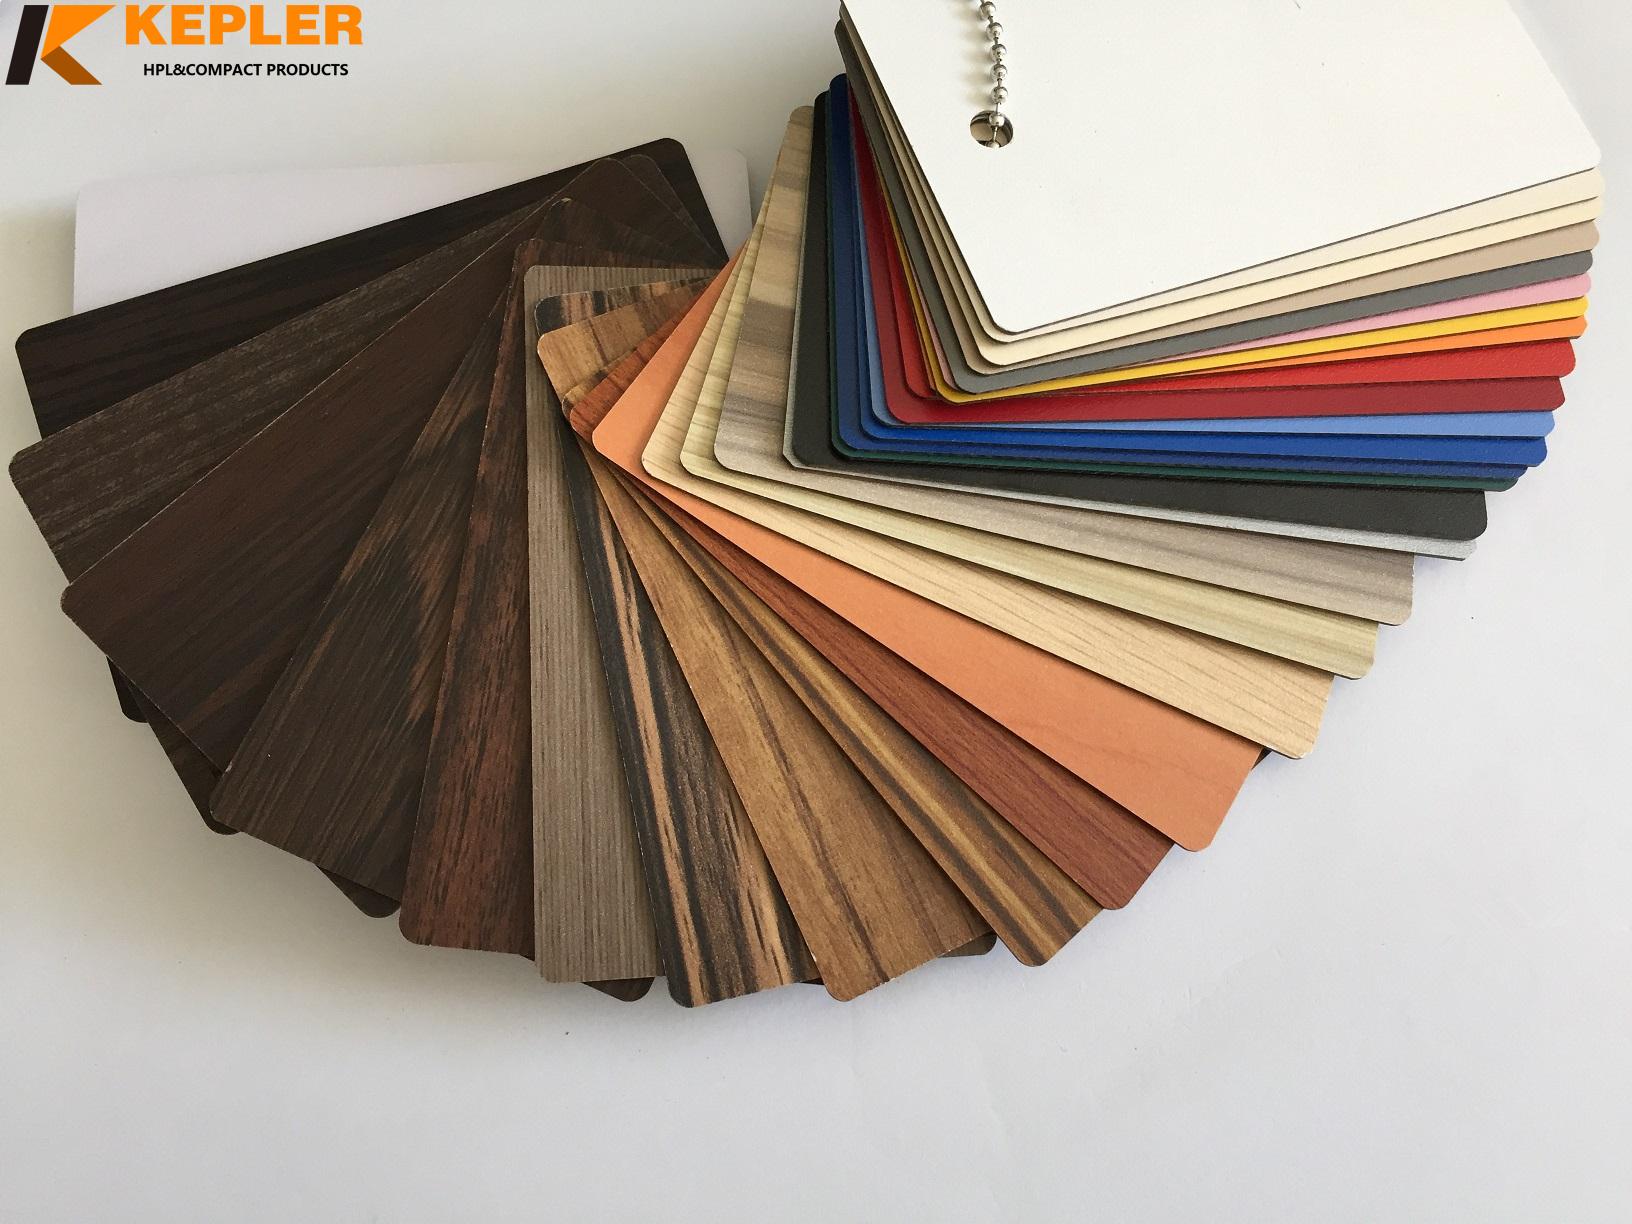 Kepler high quality white phenolic compact laminate board manufacturer with best price